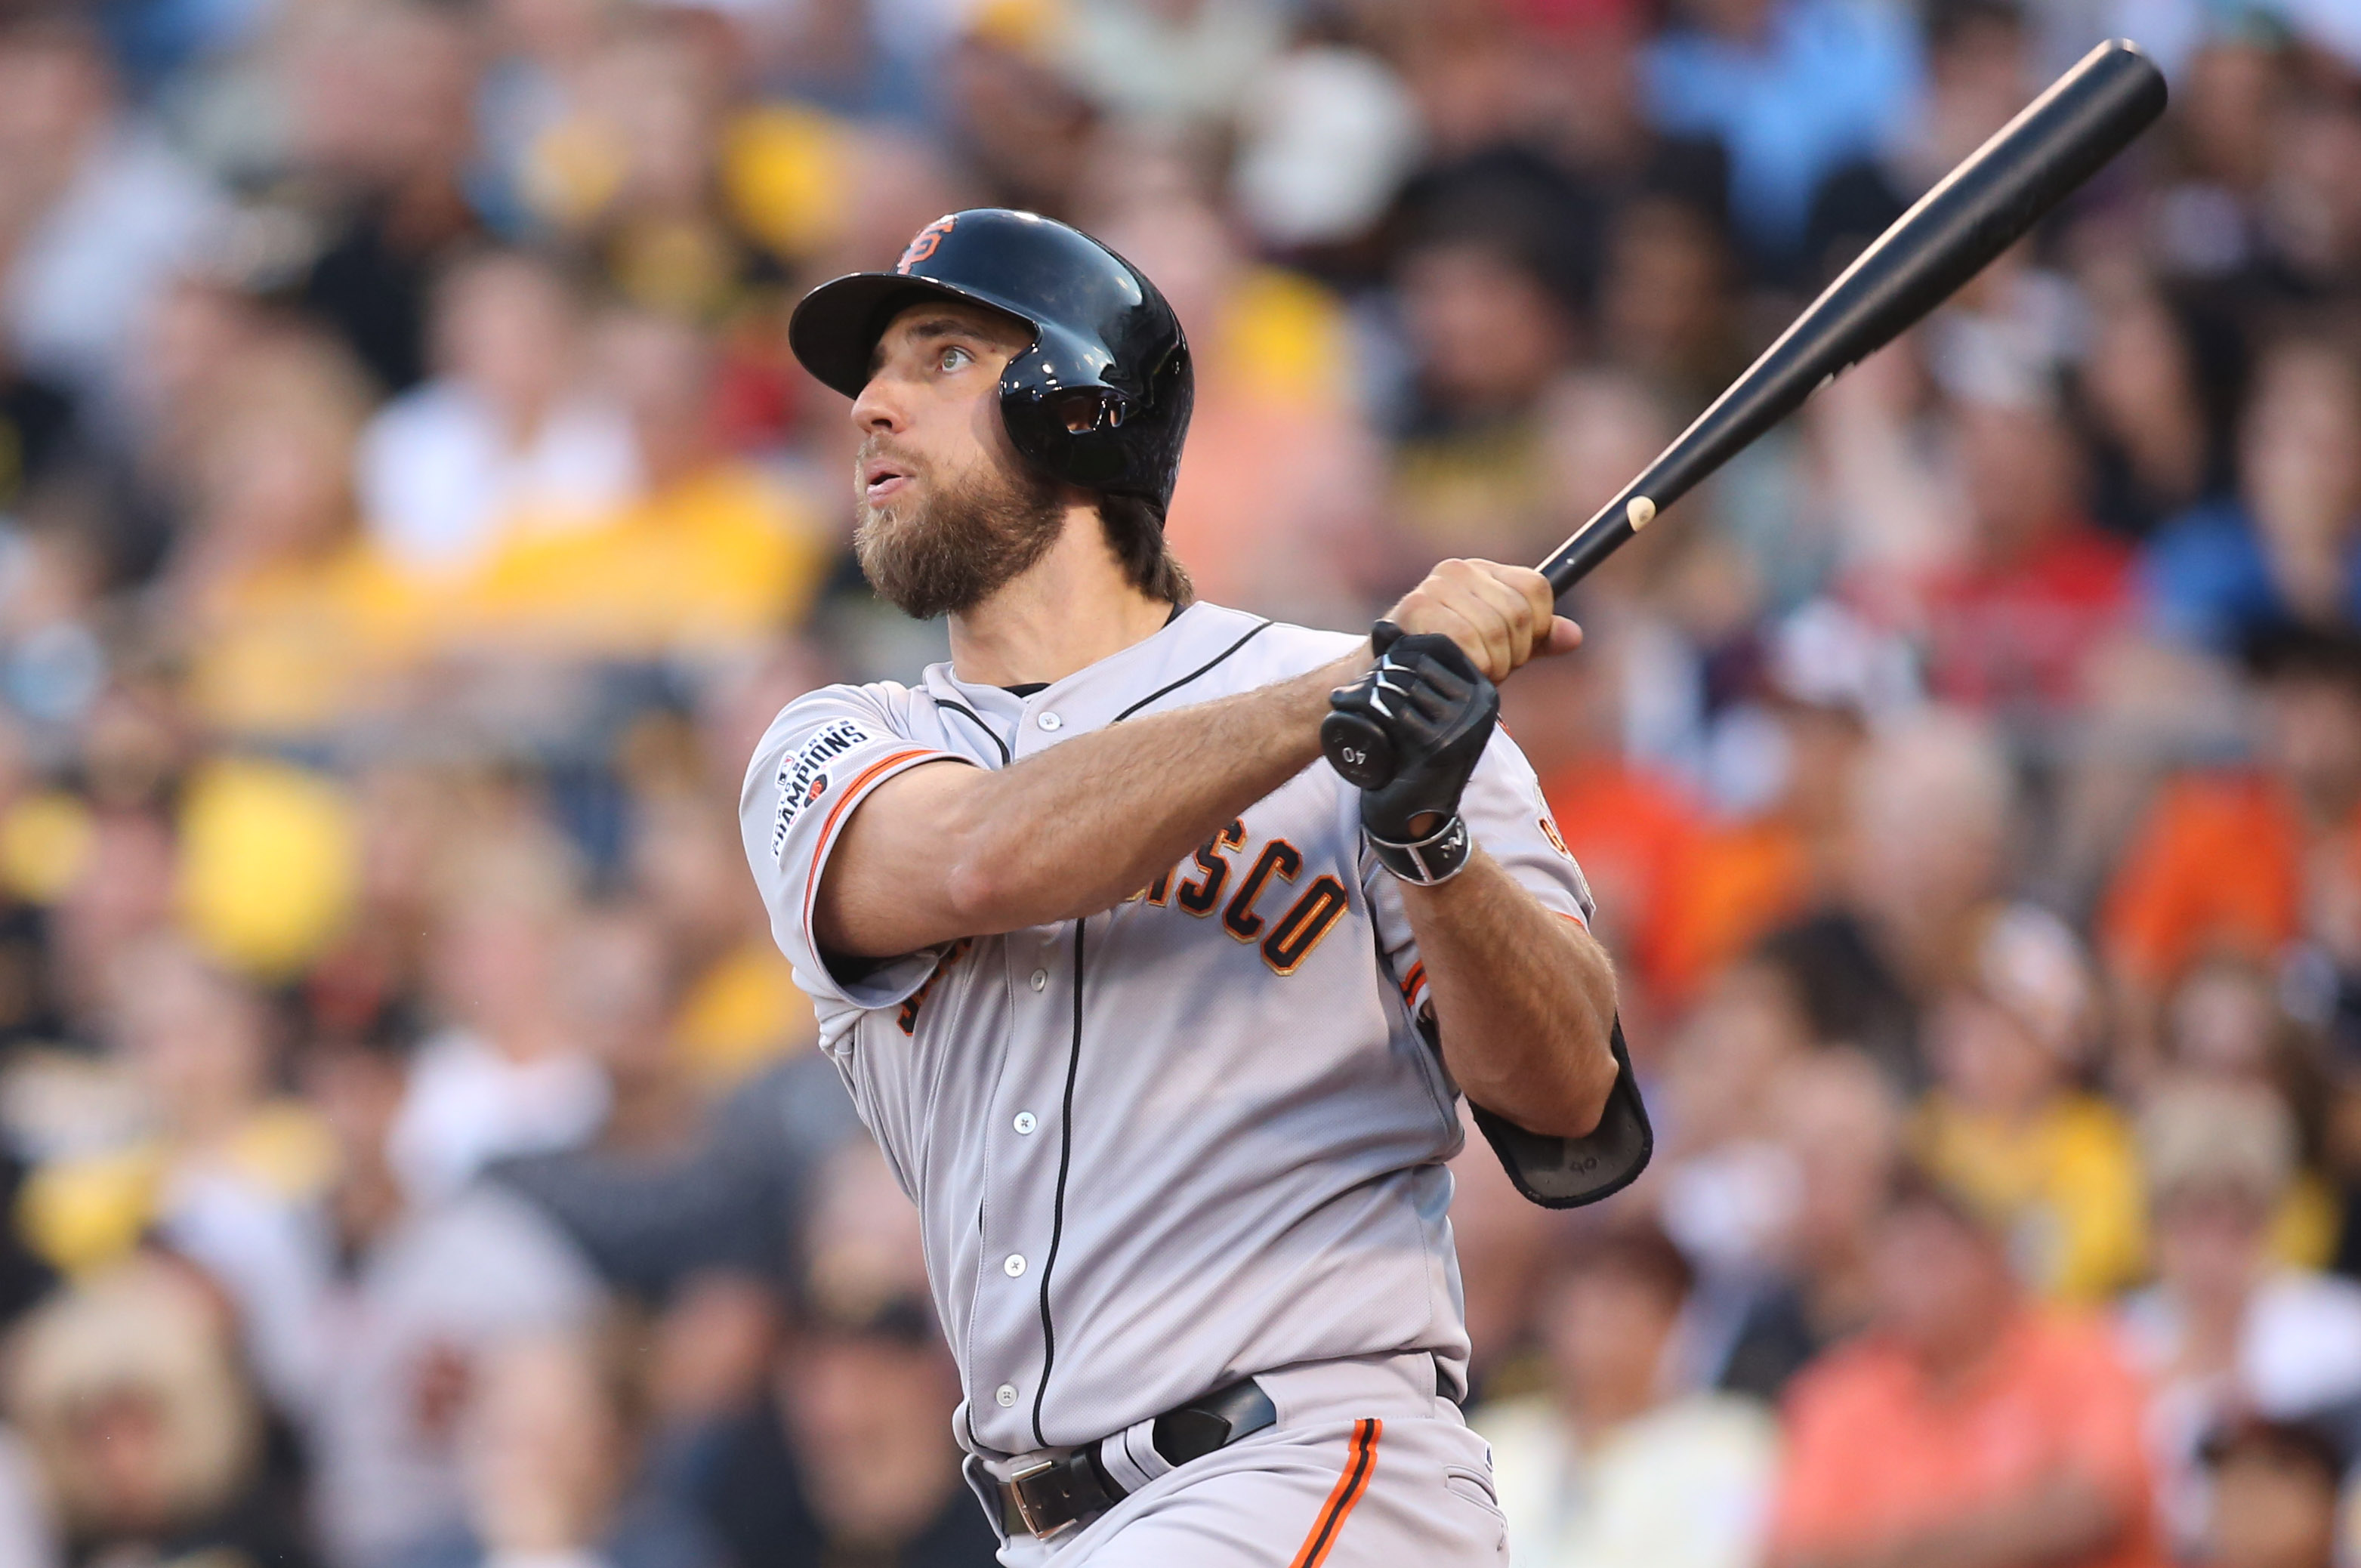 WATCH: After putting on show at batting practice, Madison Bumgarner says he  wants to participate in Home Run Derby – New York Daily News